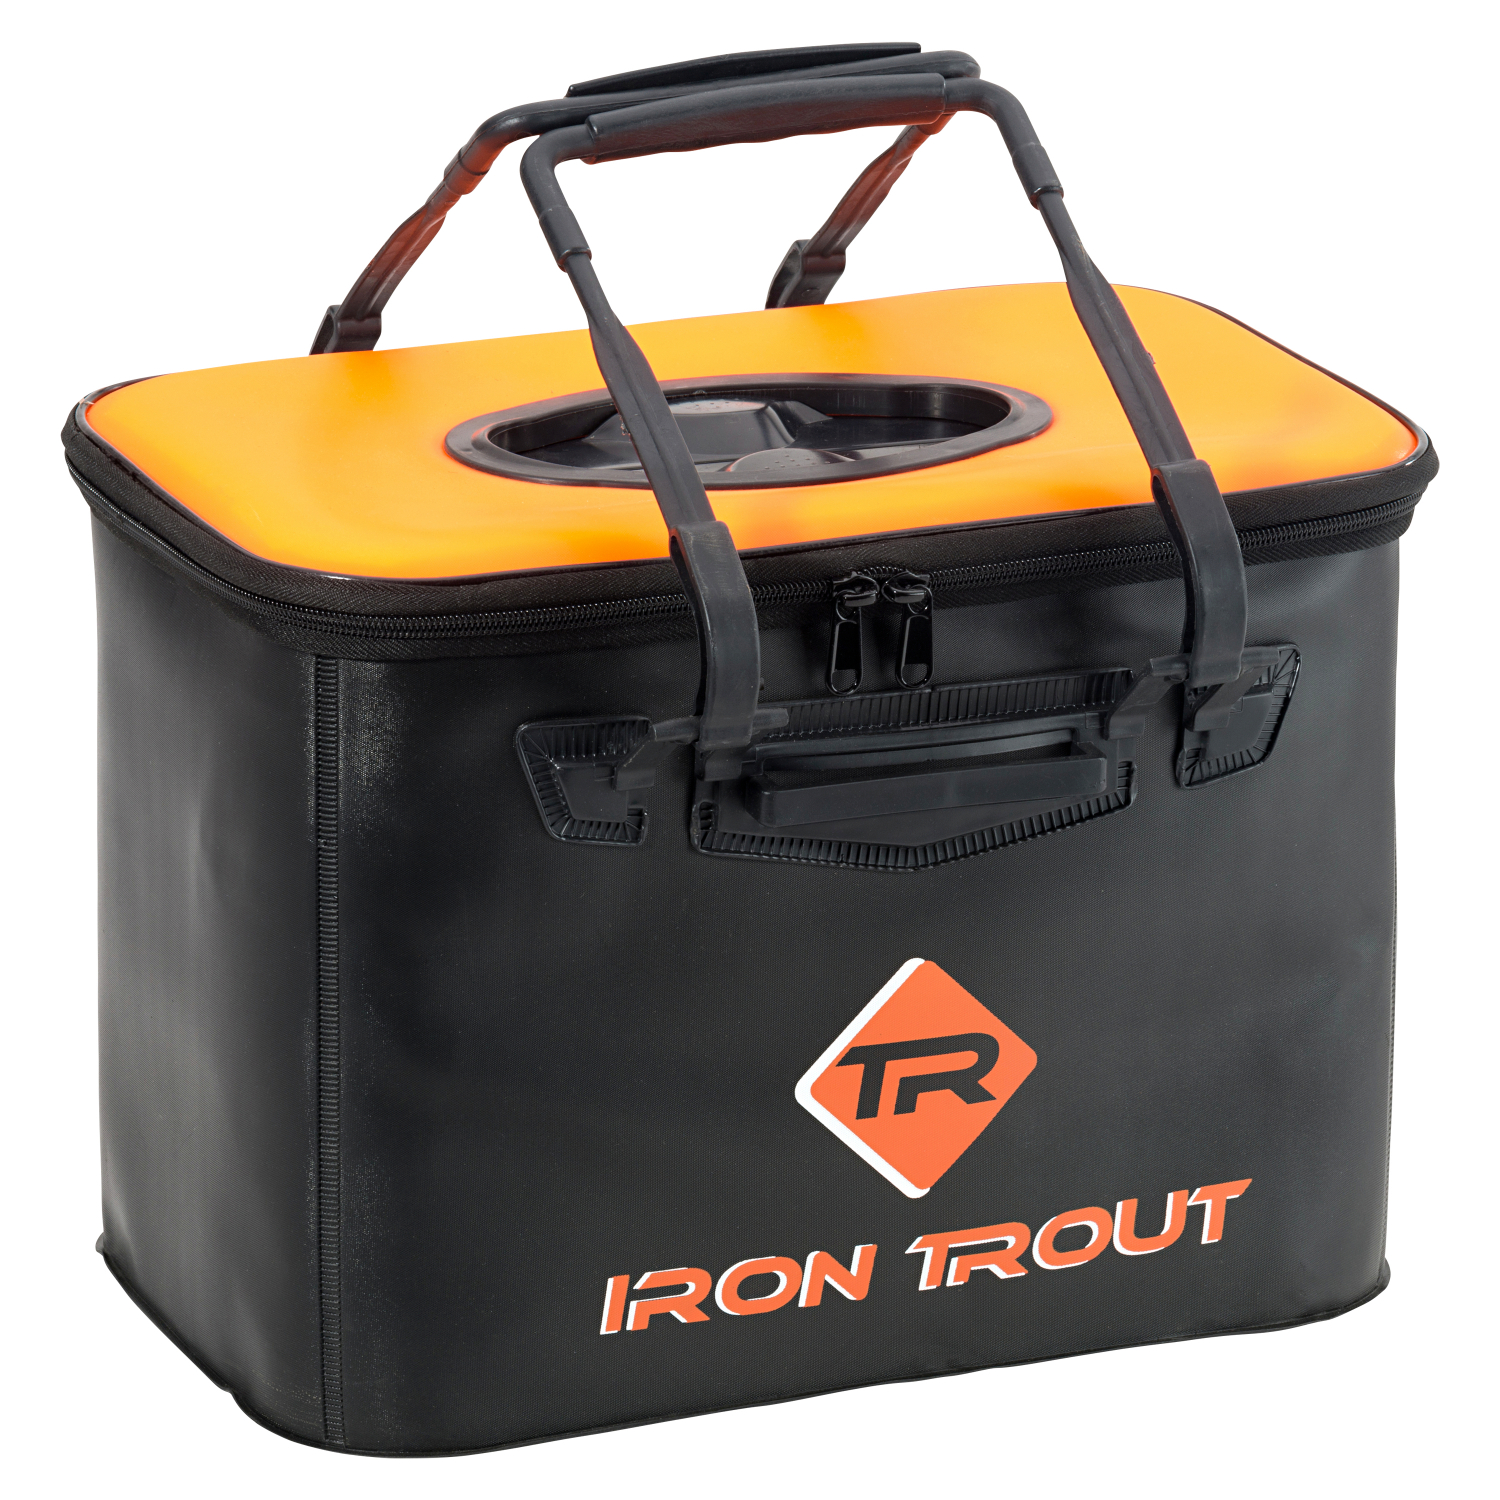 Iron Trout Quick In Cooler Bag at low prices